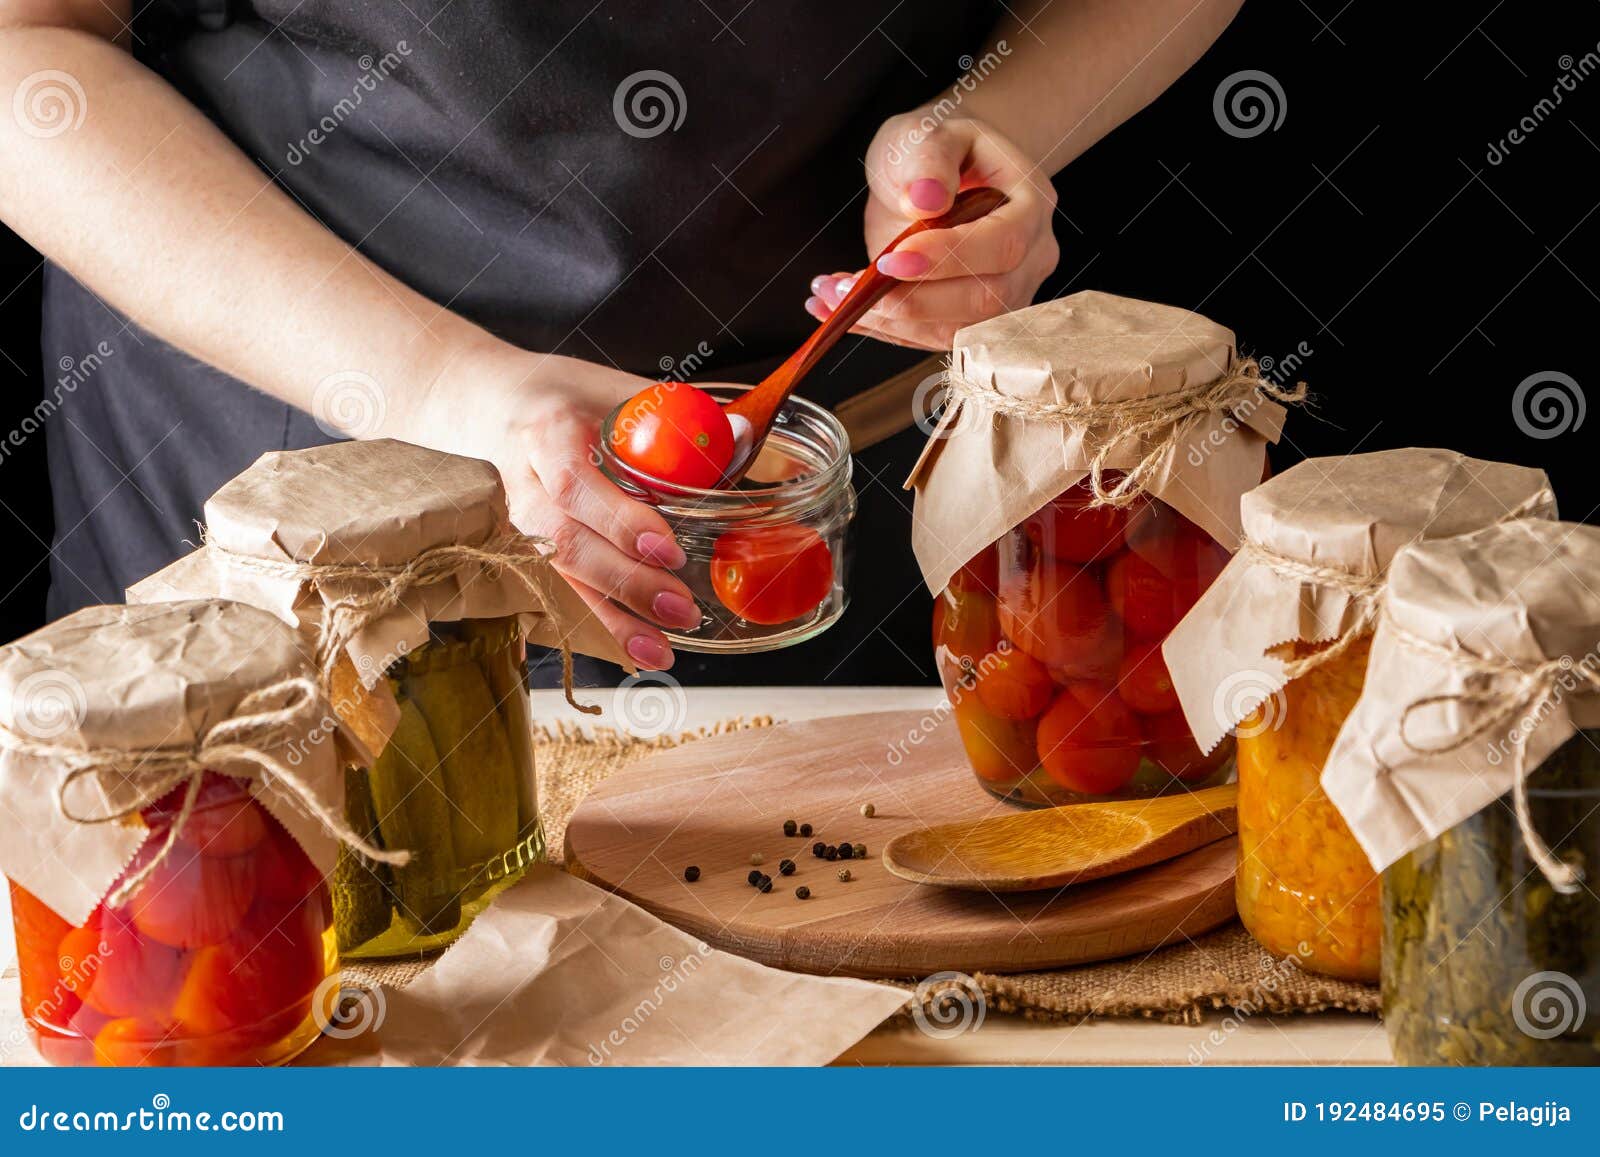 a woman ferments vegetables. pickled tomatoes in jars. preserving the autumn harvest. organic food